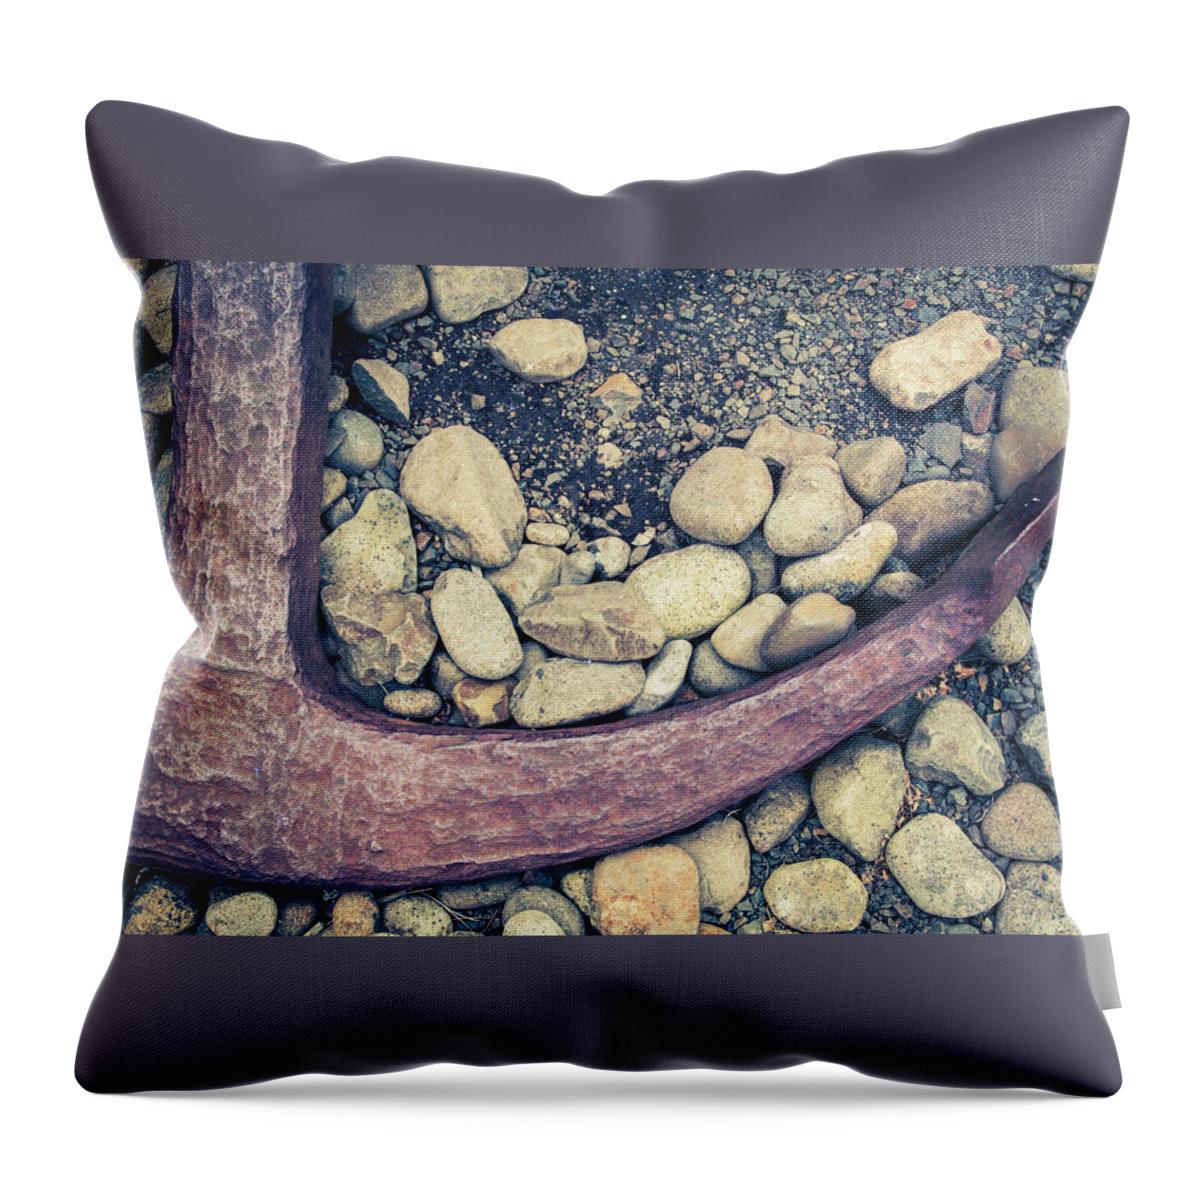 Astoria Throw Pillow featuring the photograph Aged Anchor by Catherine Avilez